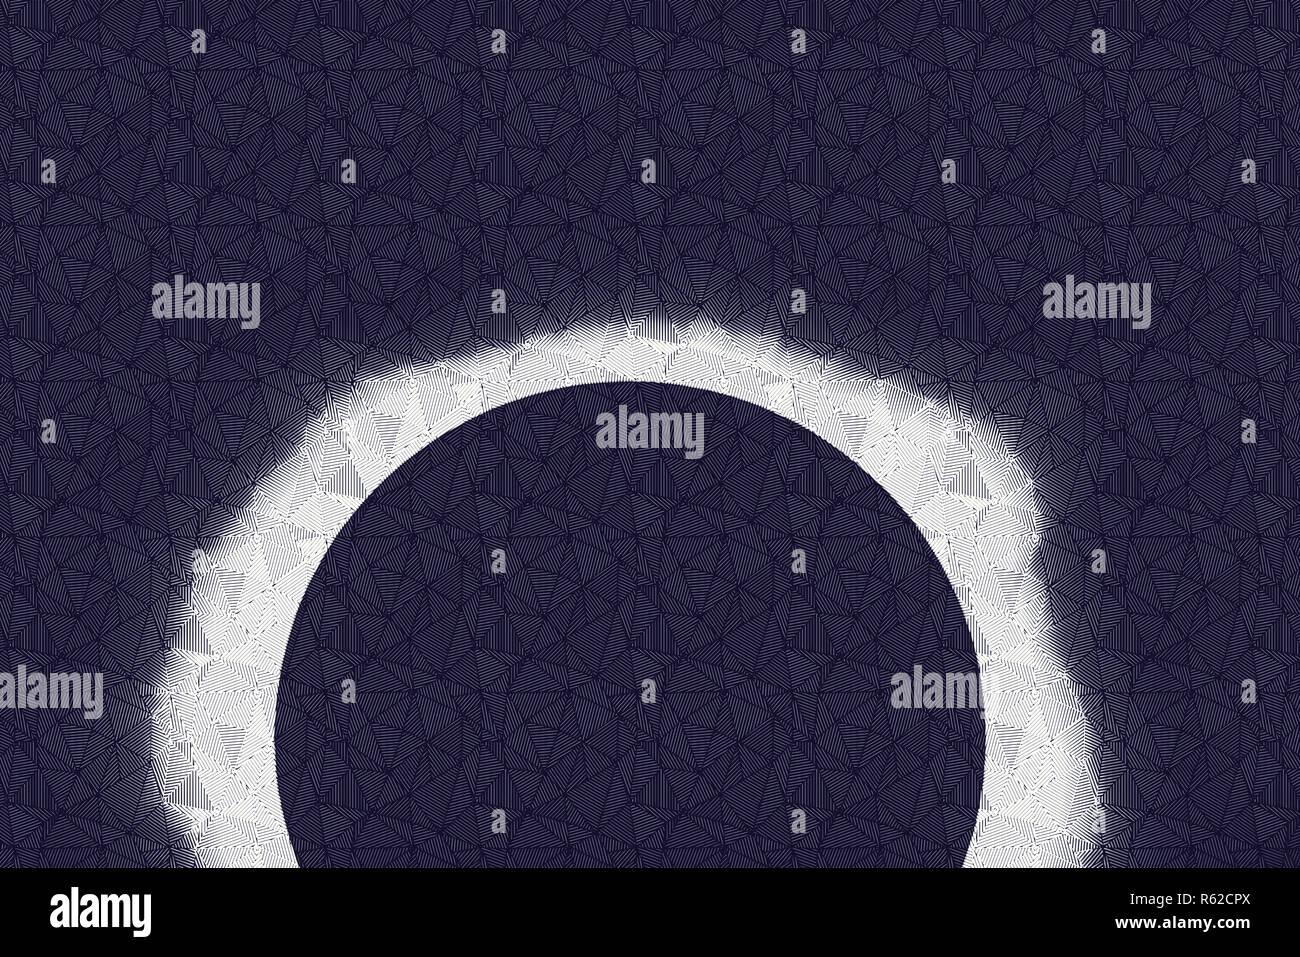 Abstract Solar Eclipse.jpg - R62CPX Stock Photo